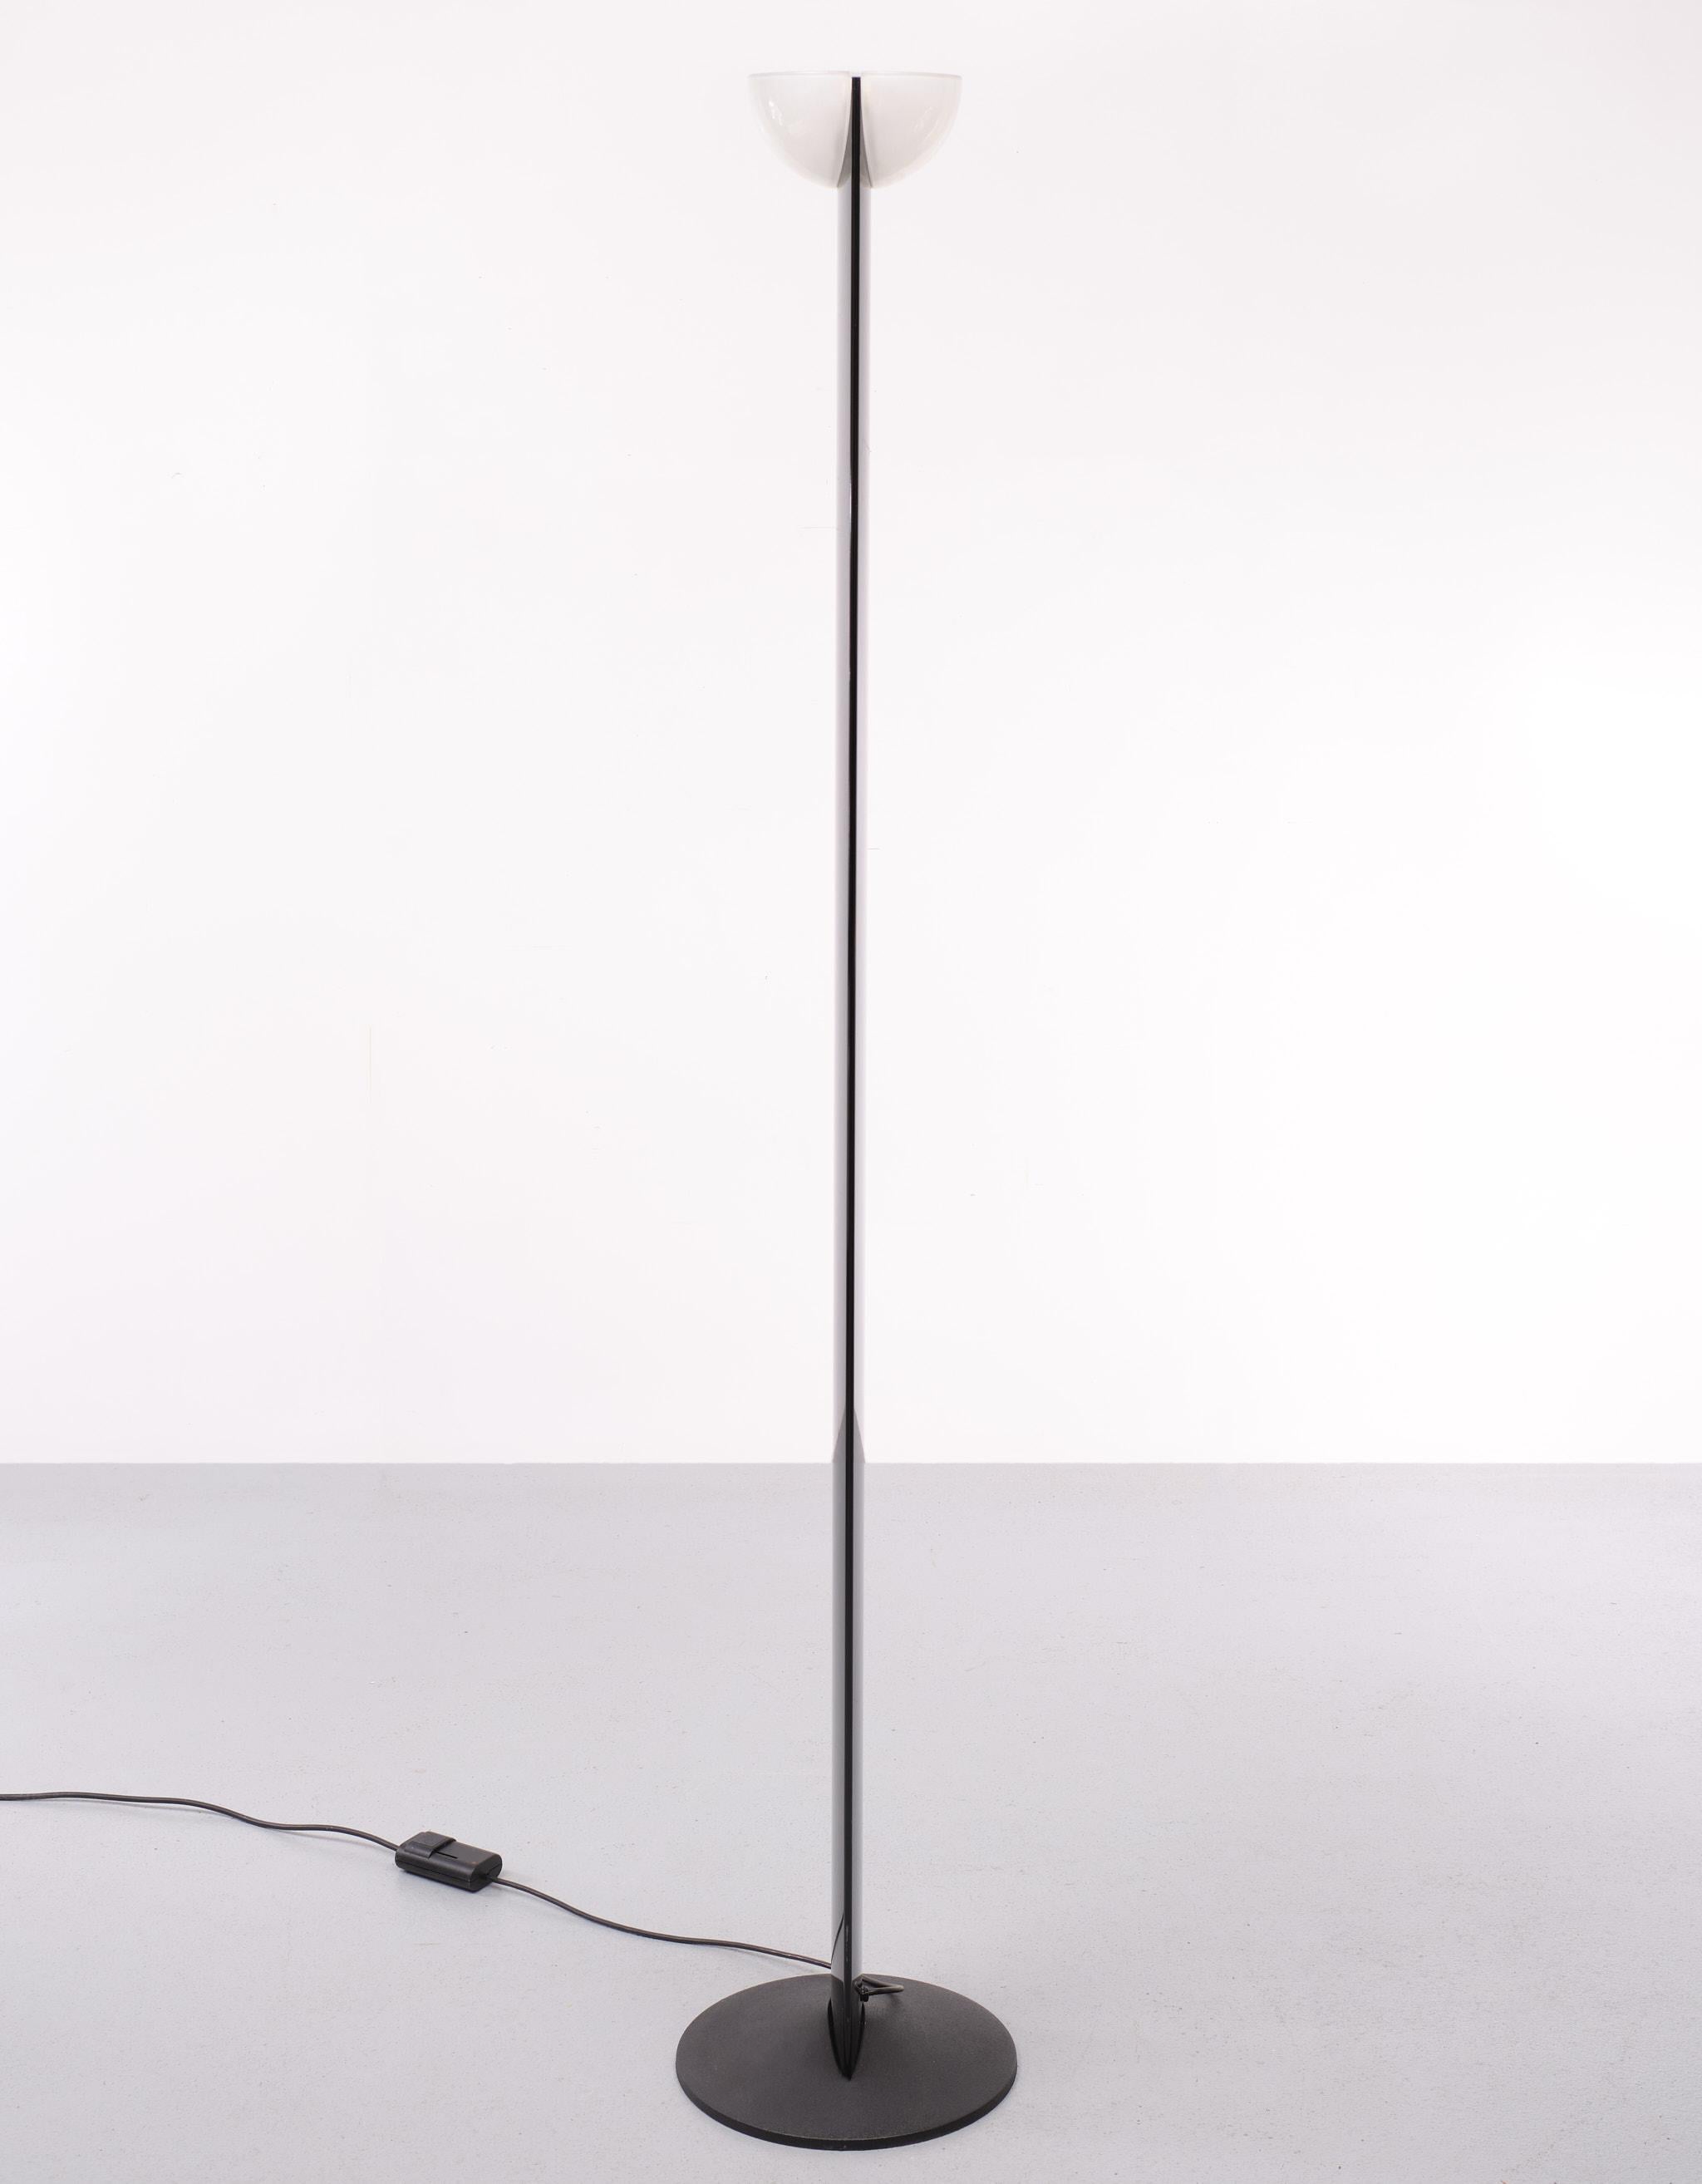 Late 20th Century Adonis Floor Lamp by Gianfranco Frattini for Luci Italia 1980s For Sale